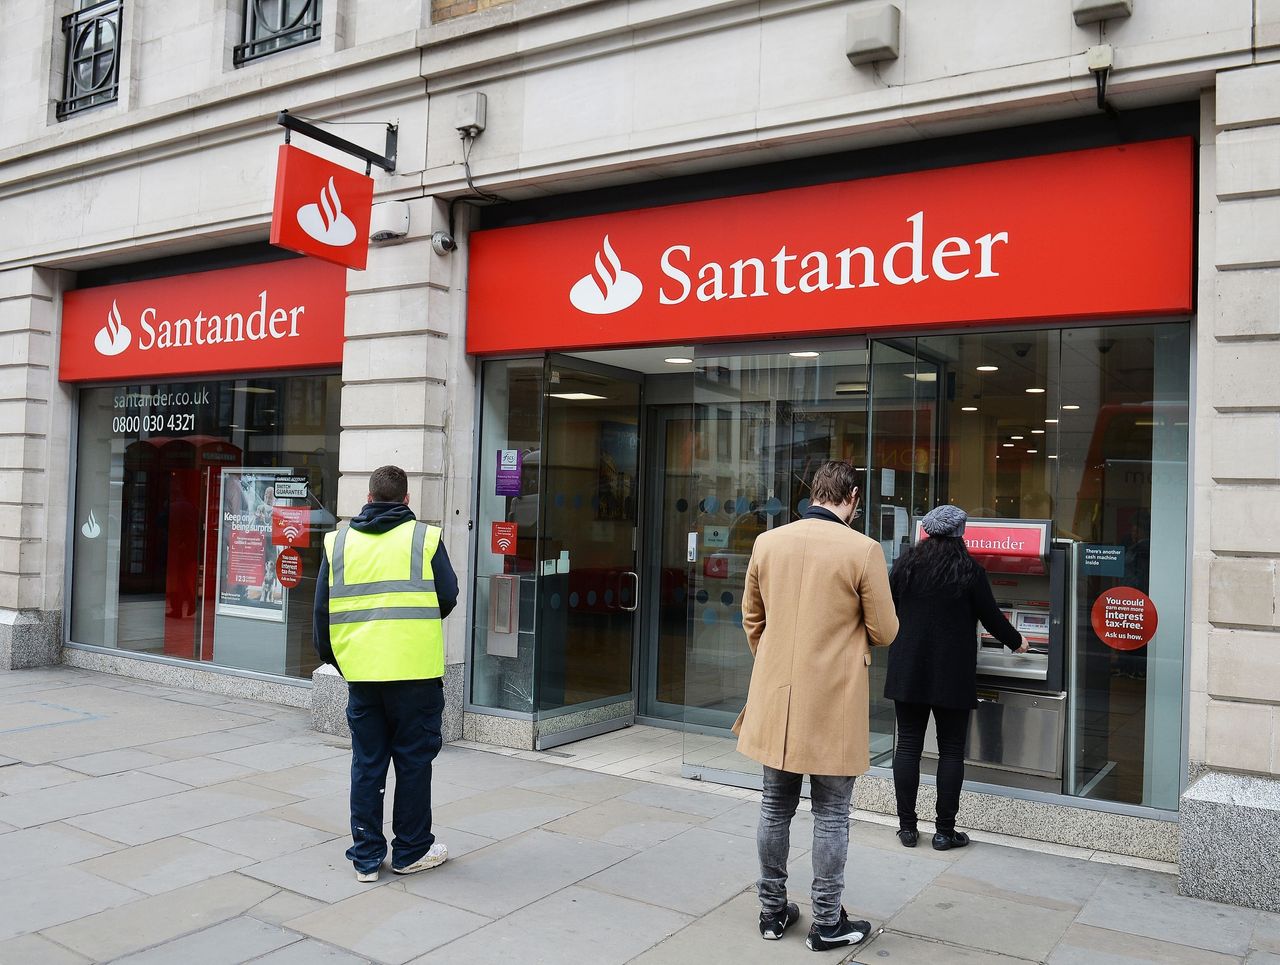 Santander was found to use 'short hours' contracts guaranteeing just 12 hours work a year